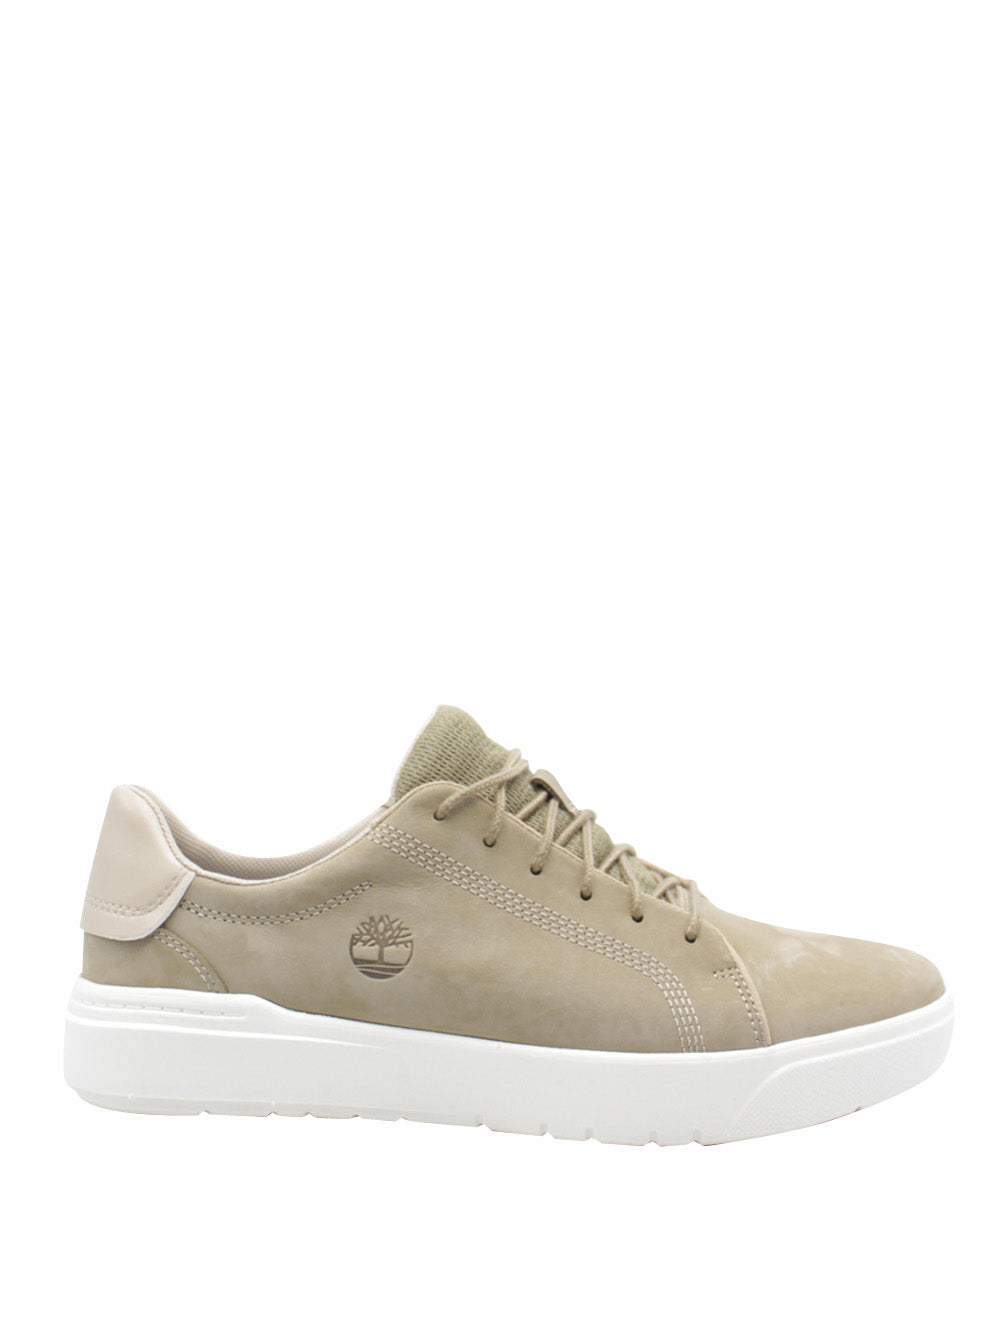 TIMBERLAND Sneakers Uomo - Beige modello TB0A5TY5DR01